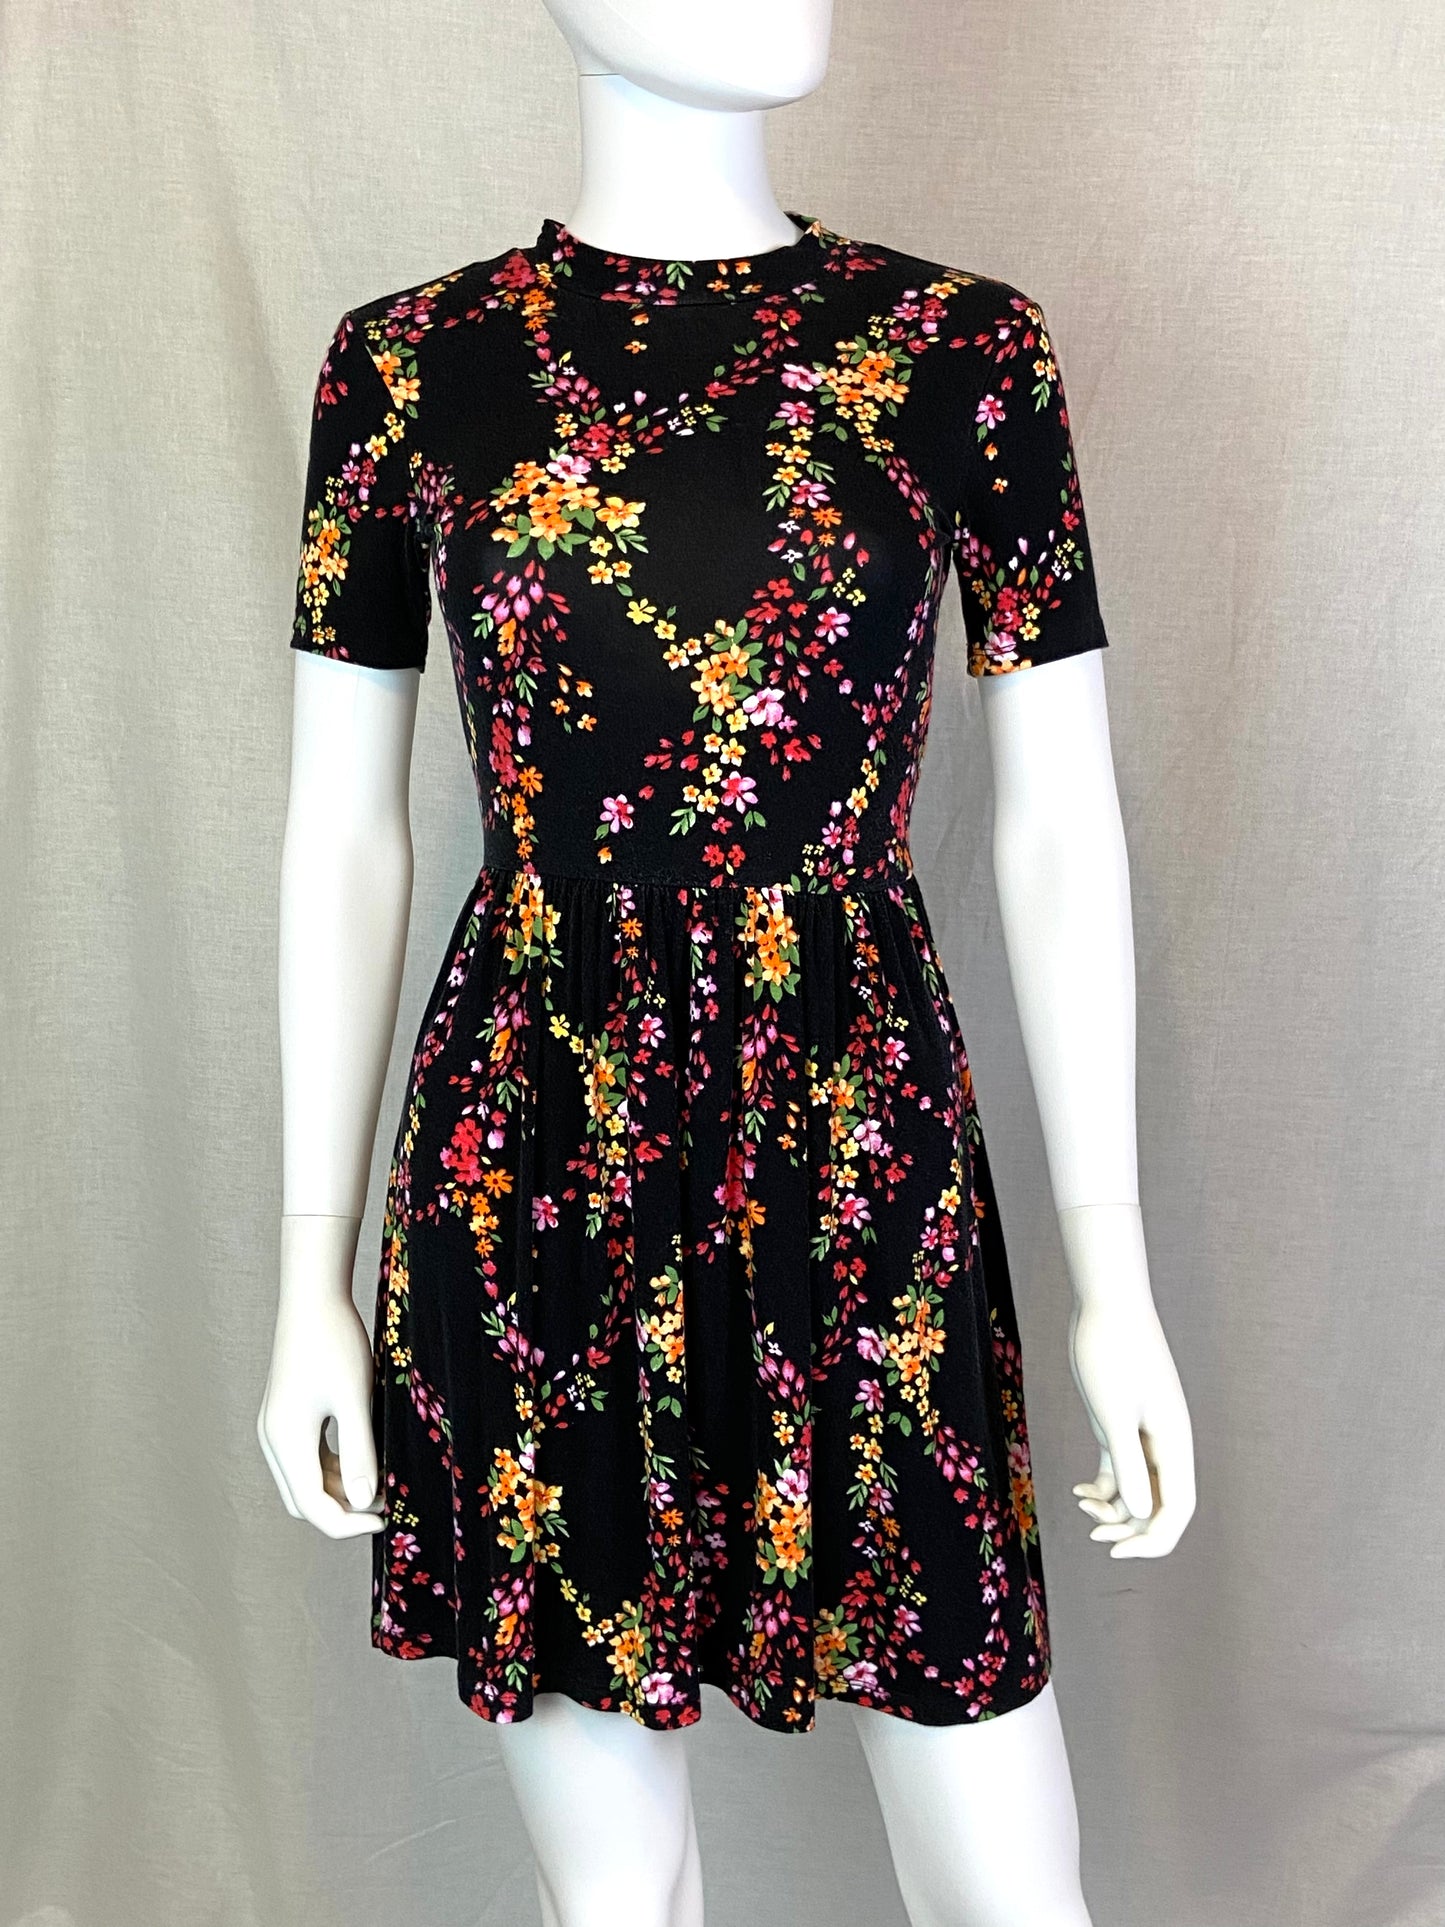 Forever 21 Black Floral Open Back Dress Small